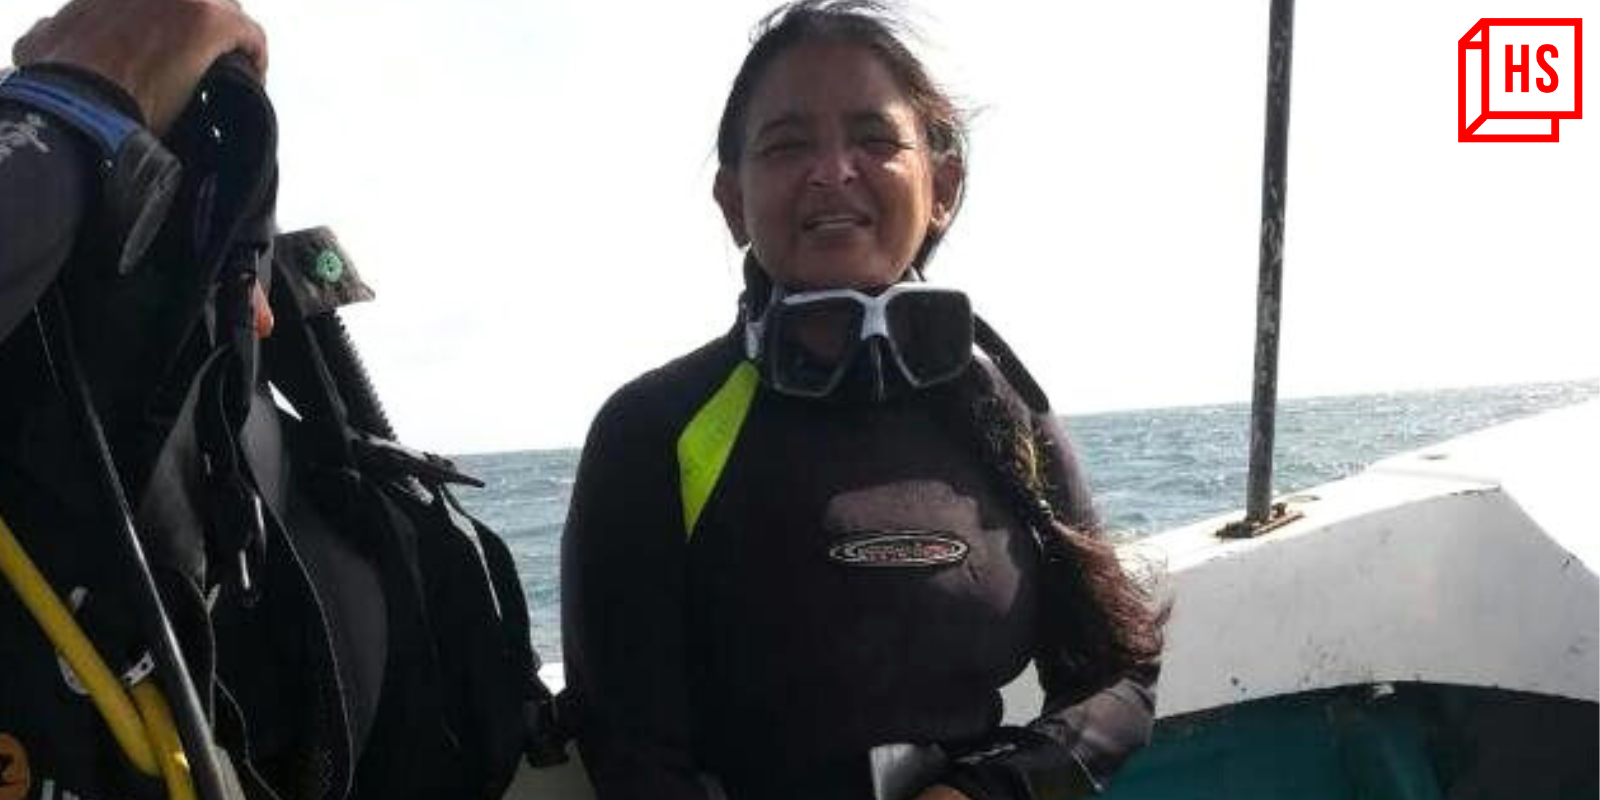 Taking the plunge at 49: Meet Uma Mani, India’s Coral Woman and climate champion